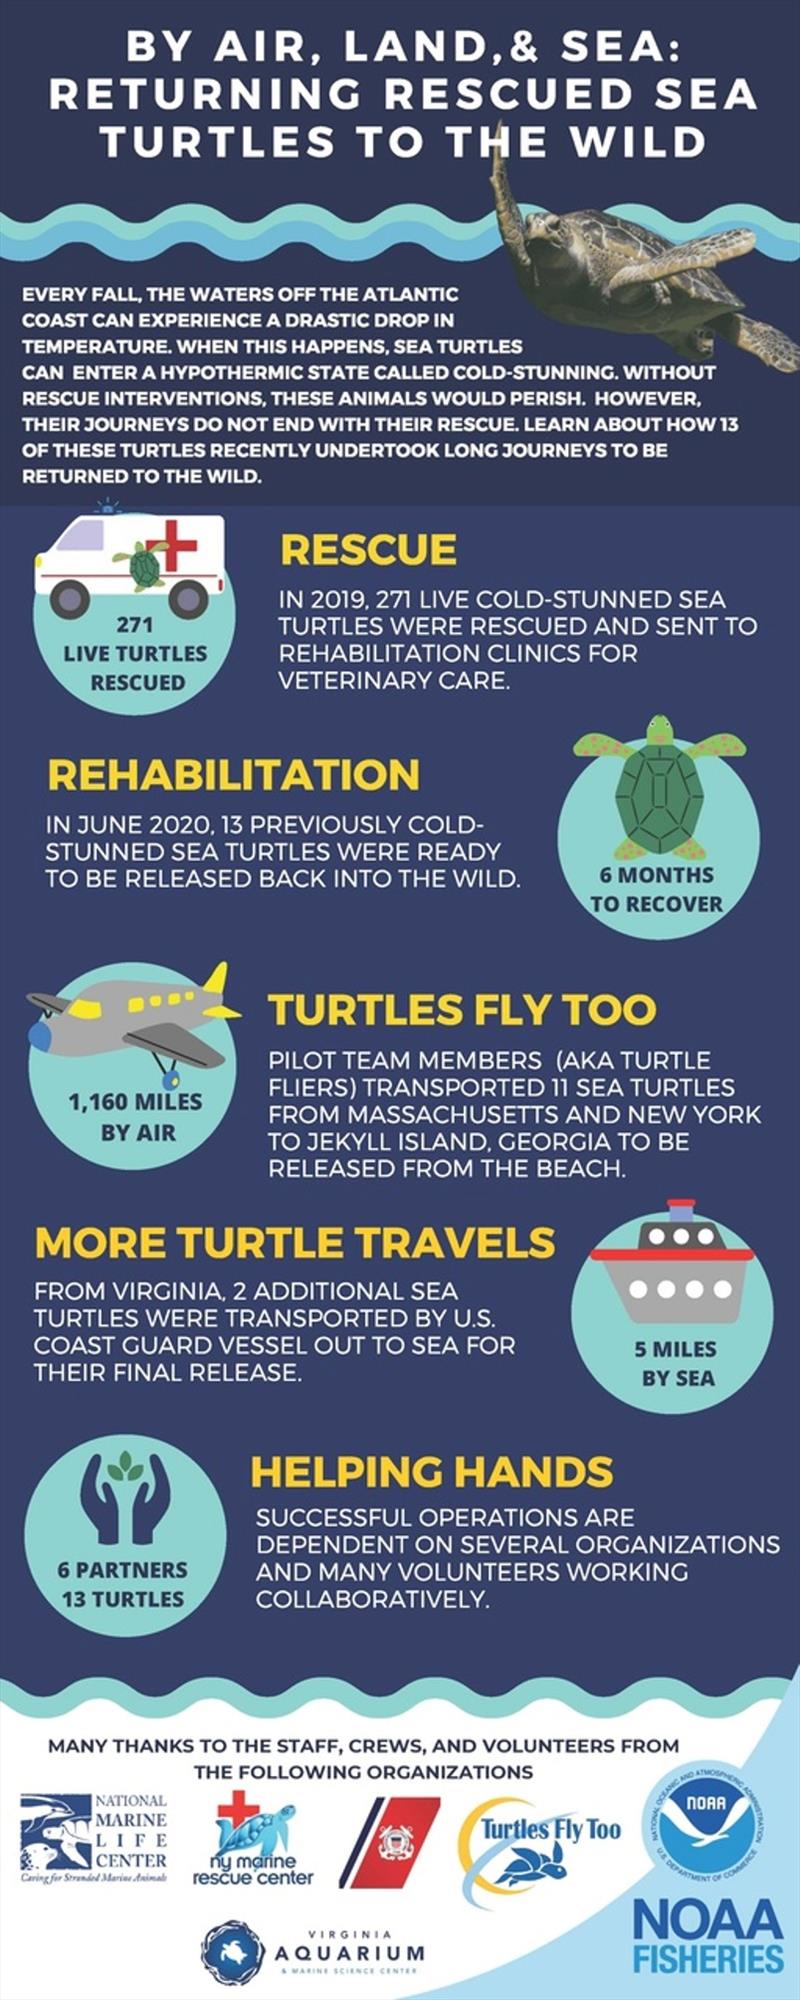 Returning rescued sea turtles to the wild by land, air, and sea photo copyright NOAA Fisheries taken at 